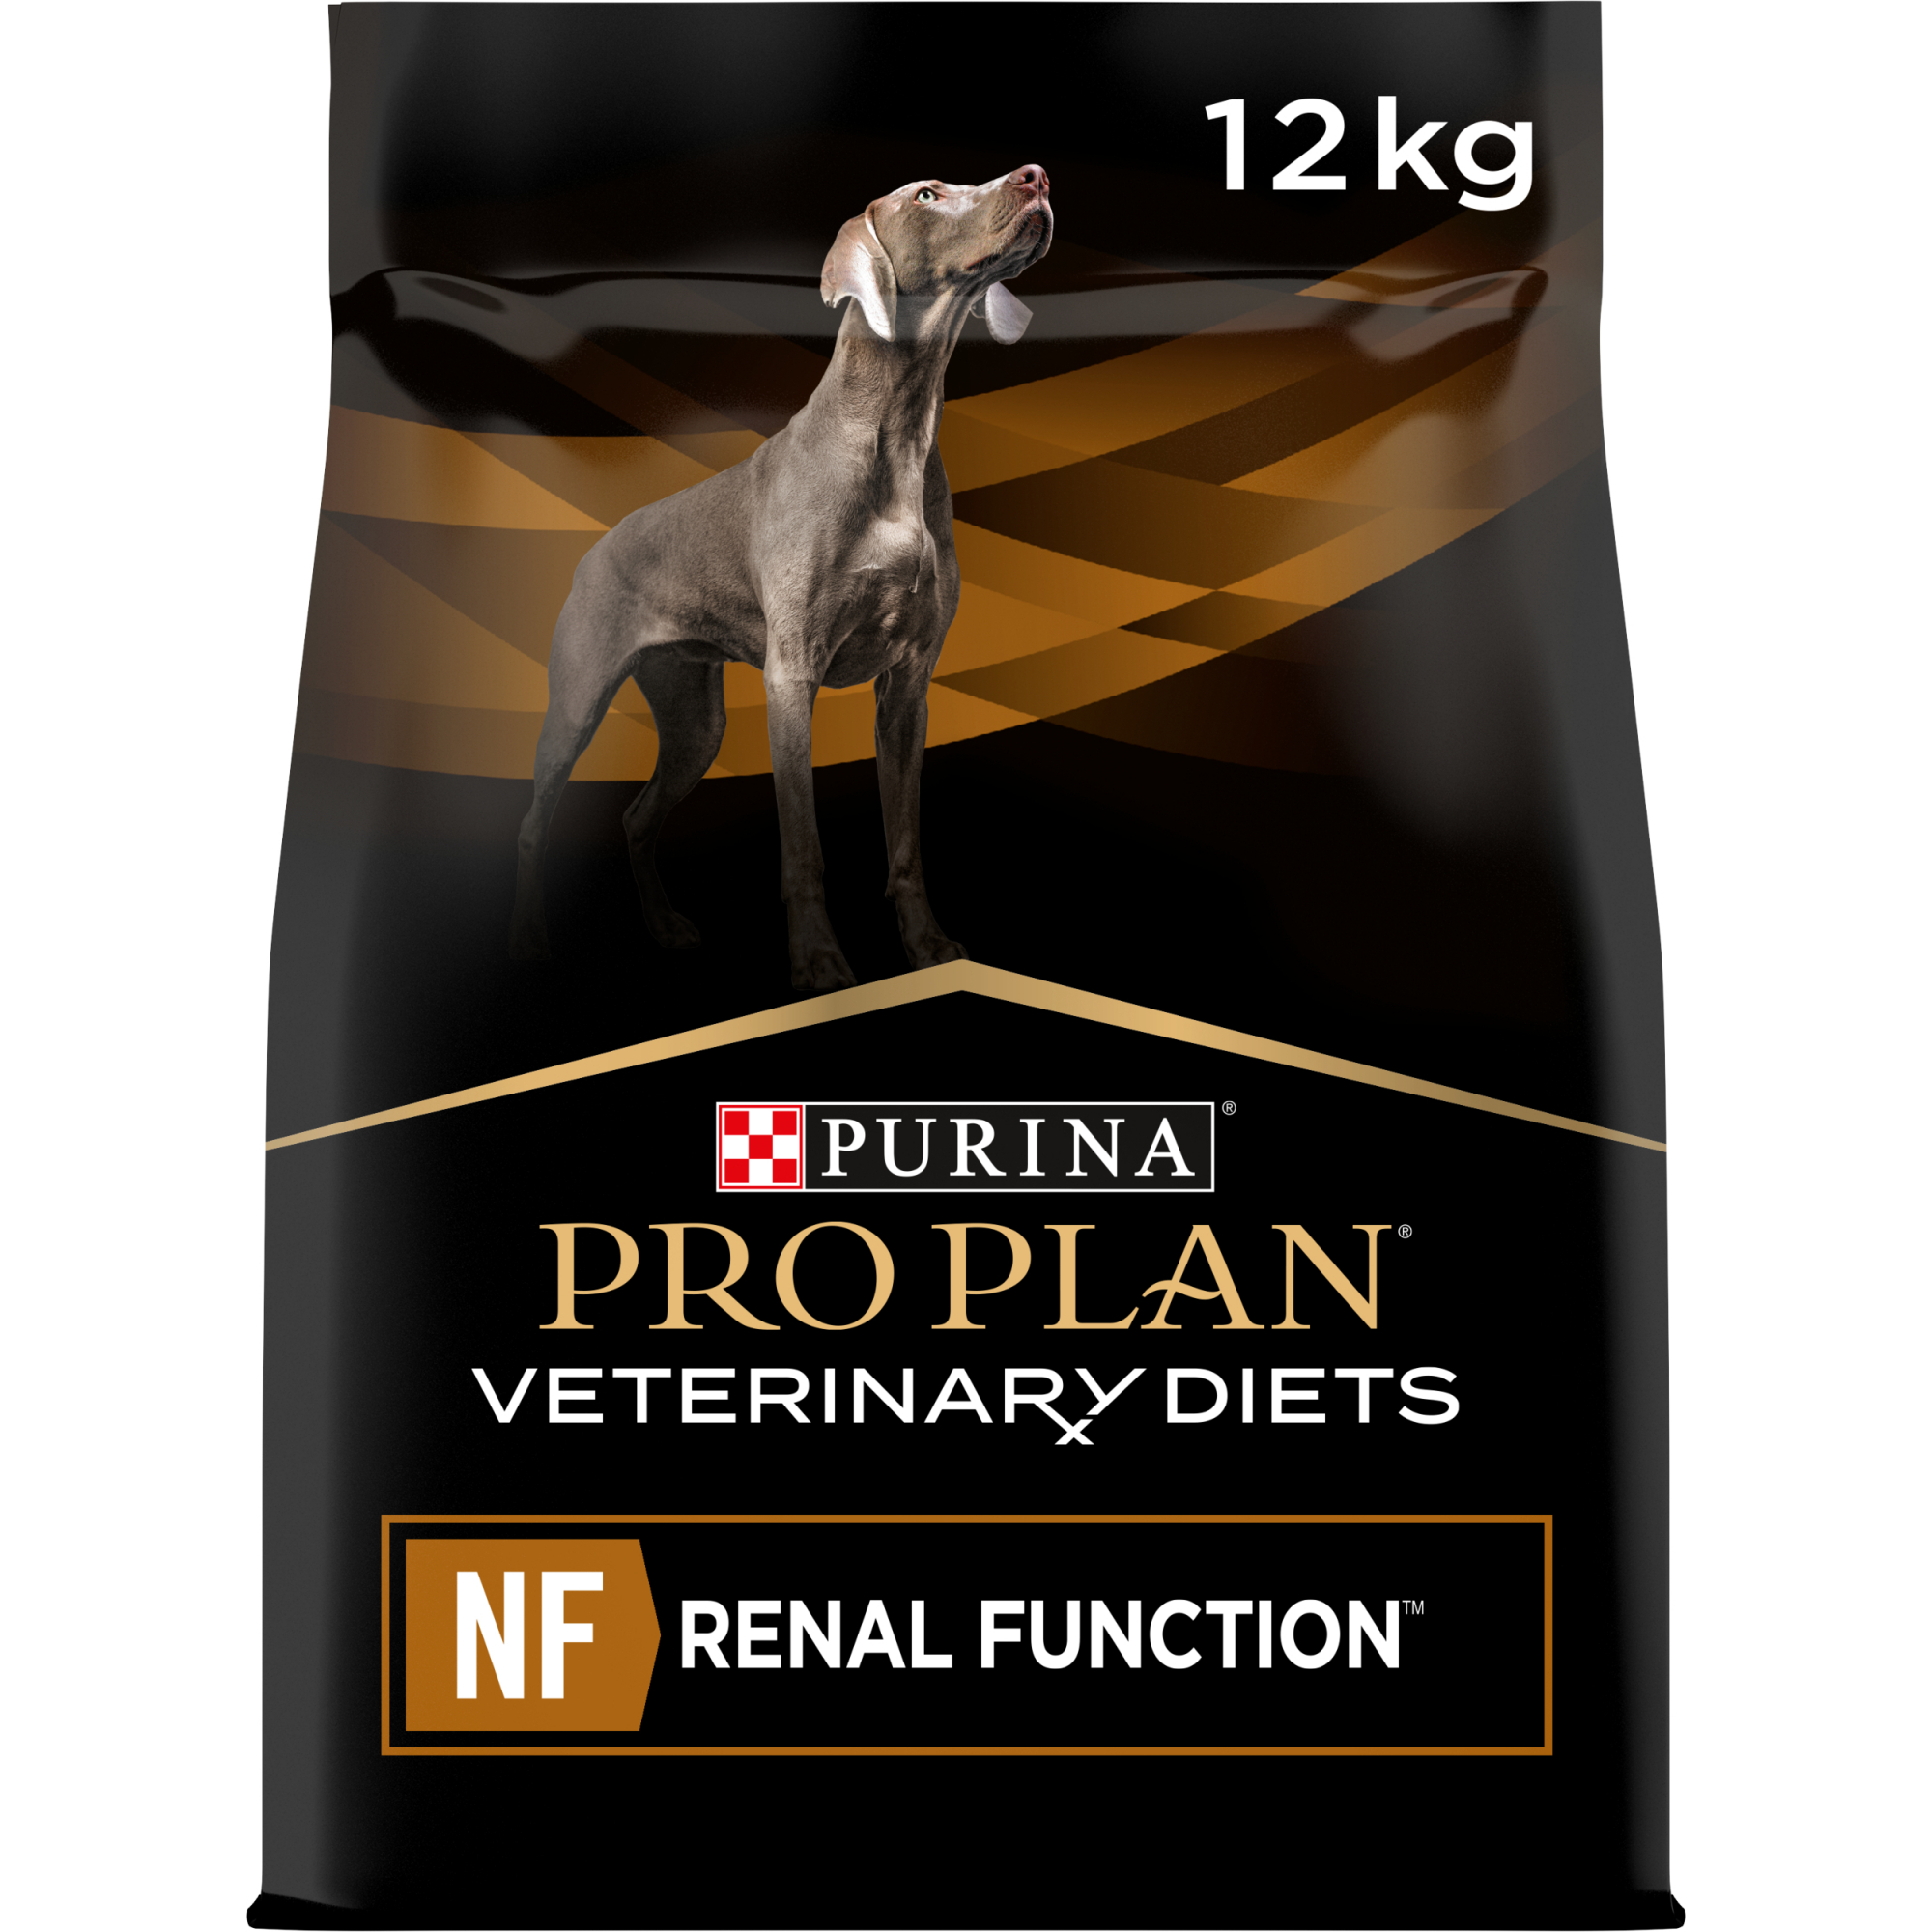 Proplan Veterinary Diets Canine NF Renal Function